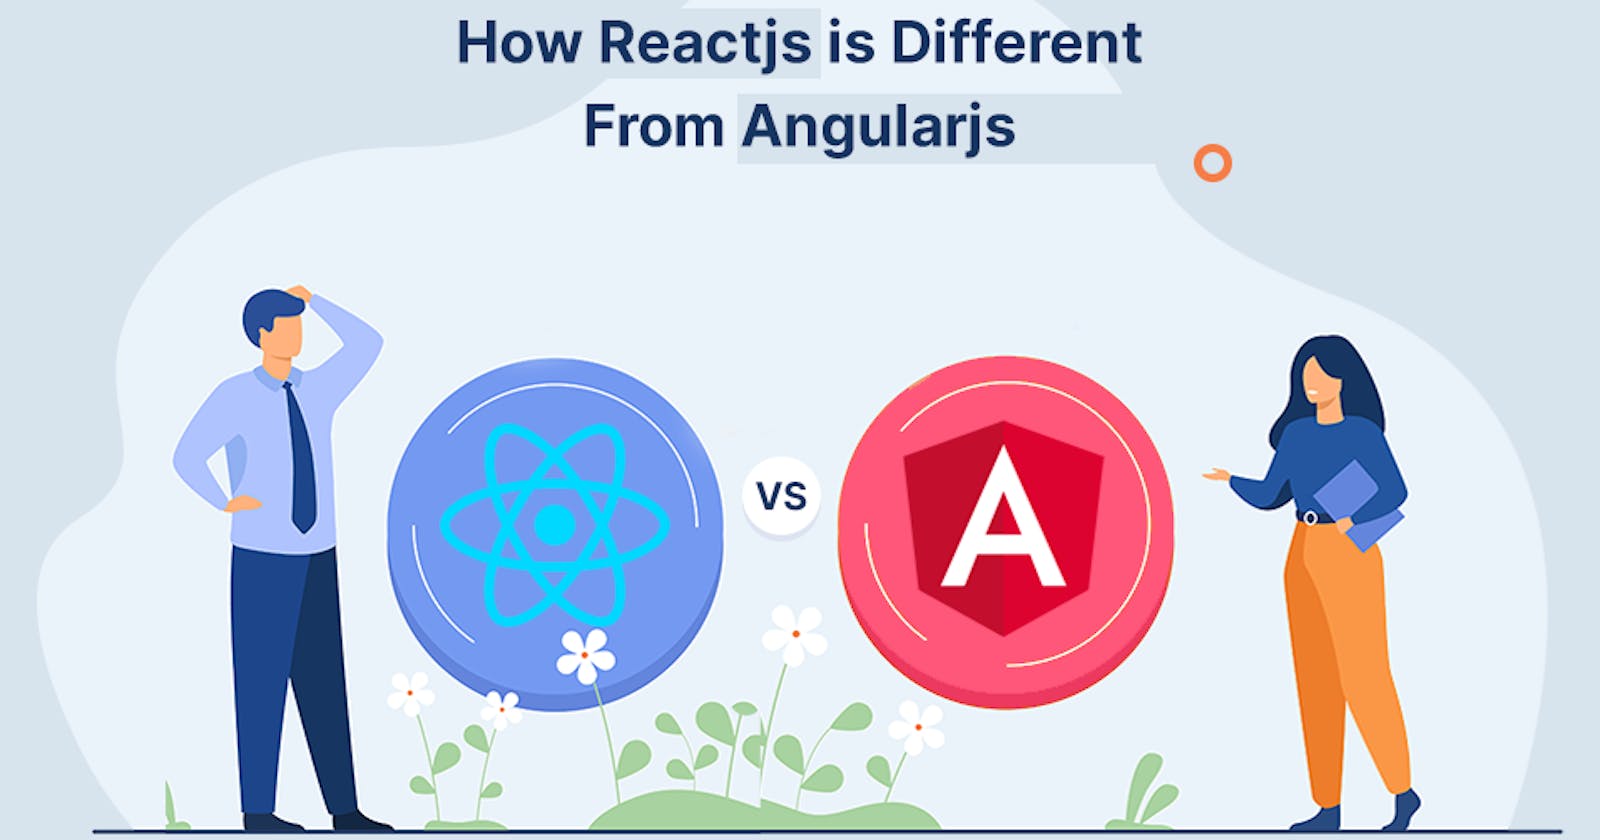 How ReactJS is Different from AngularJS